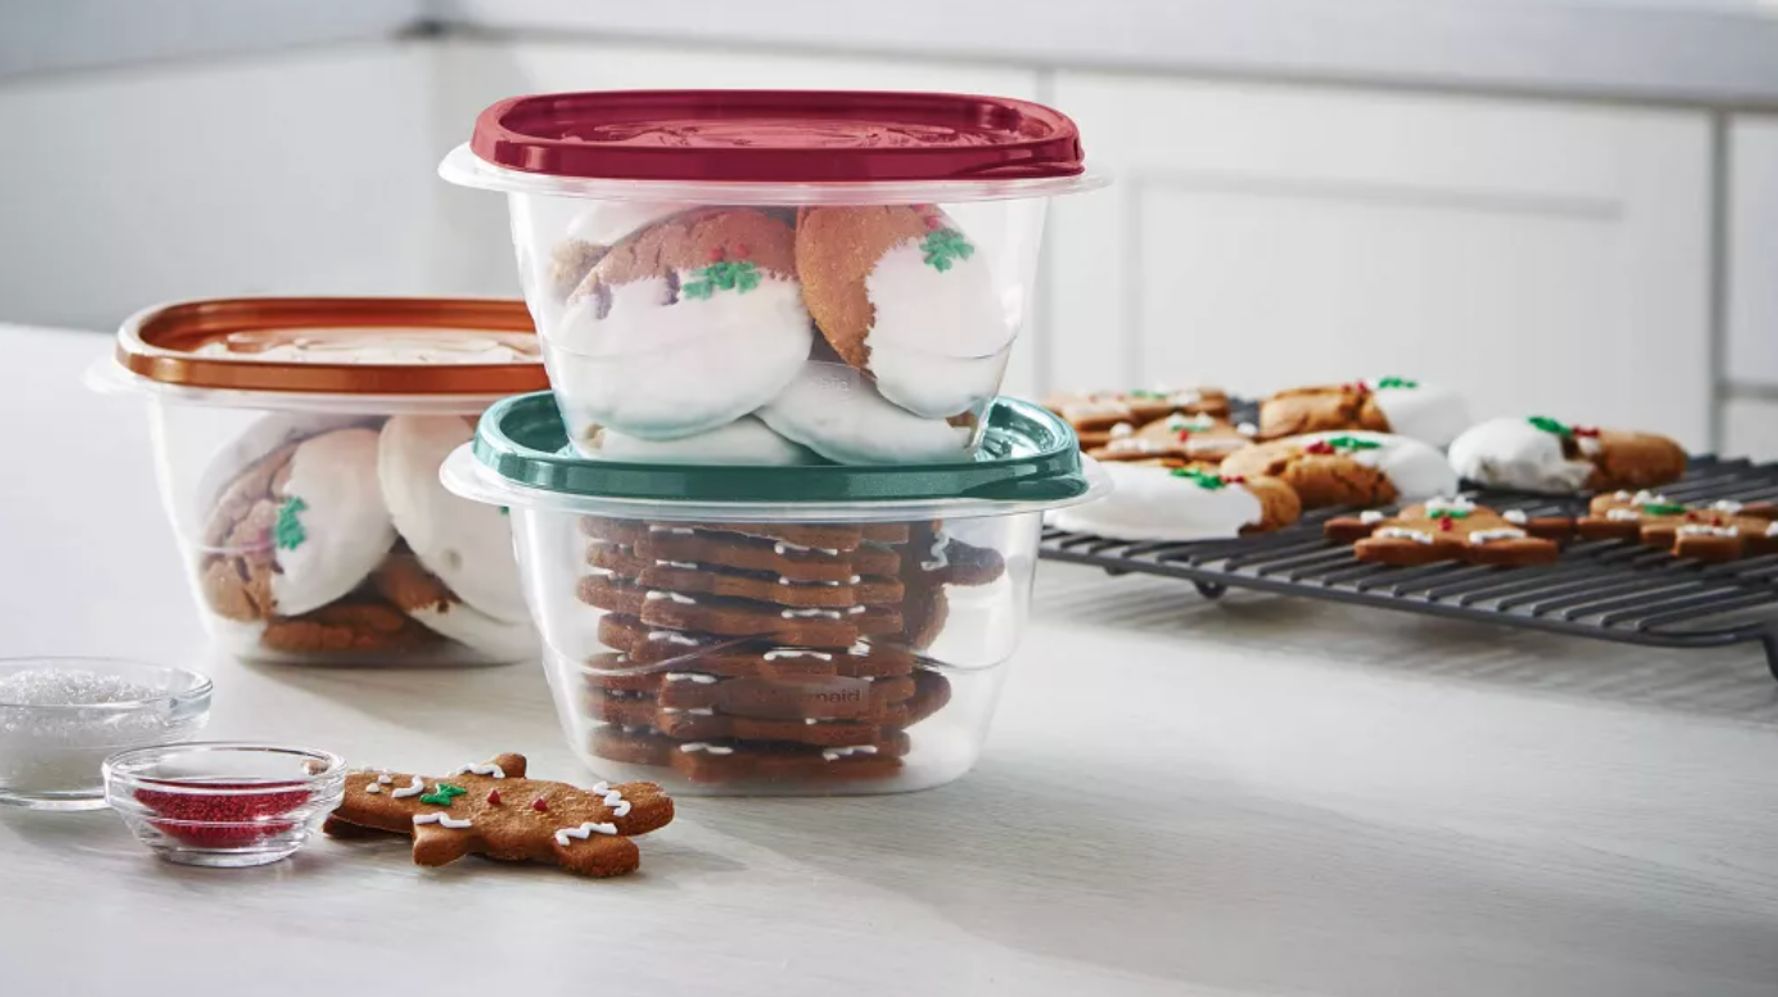 Rubbermaid Easy-Find Lid Food Storage Container, France